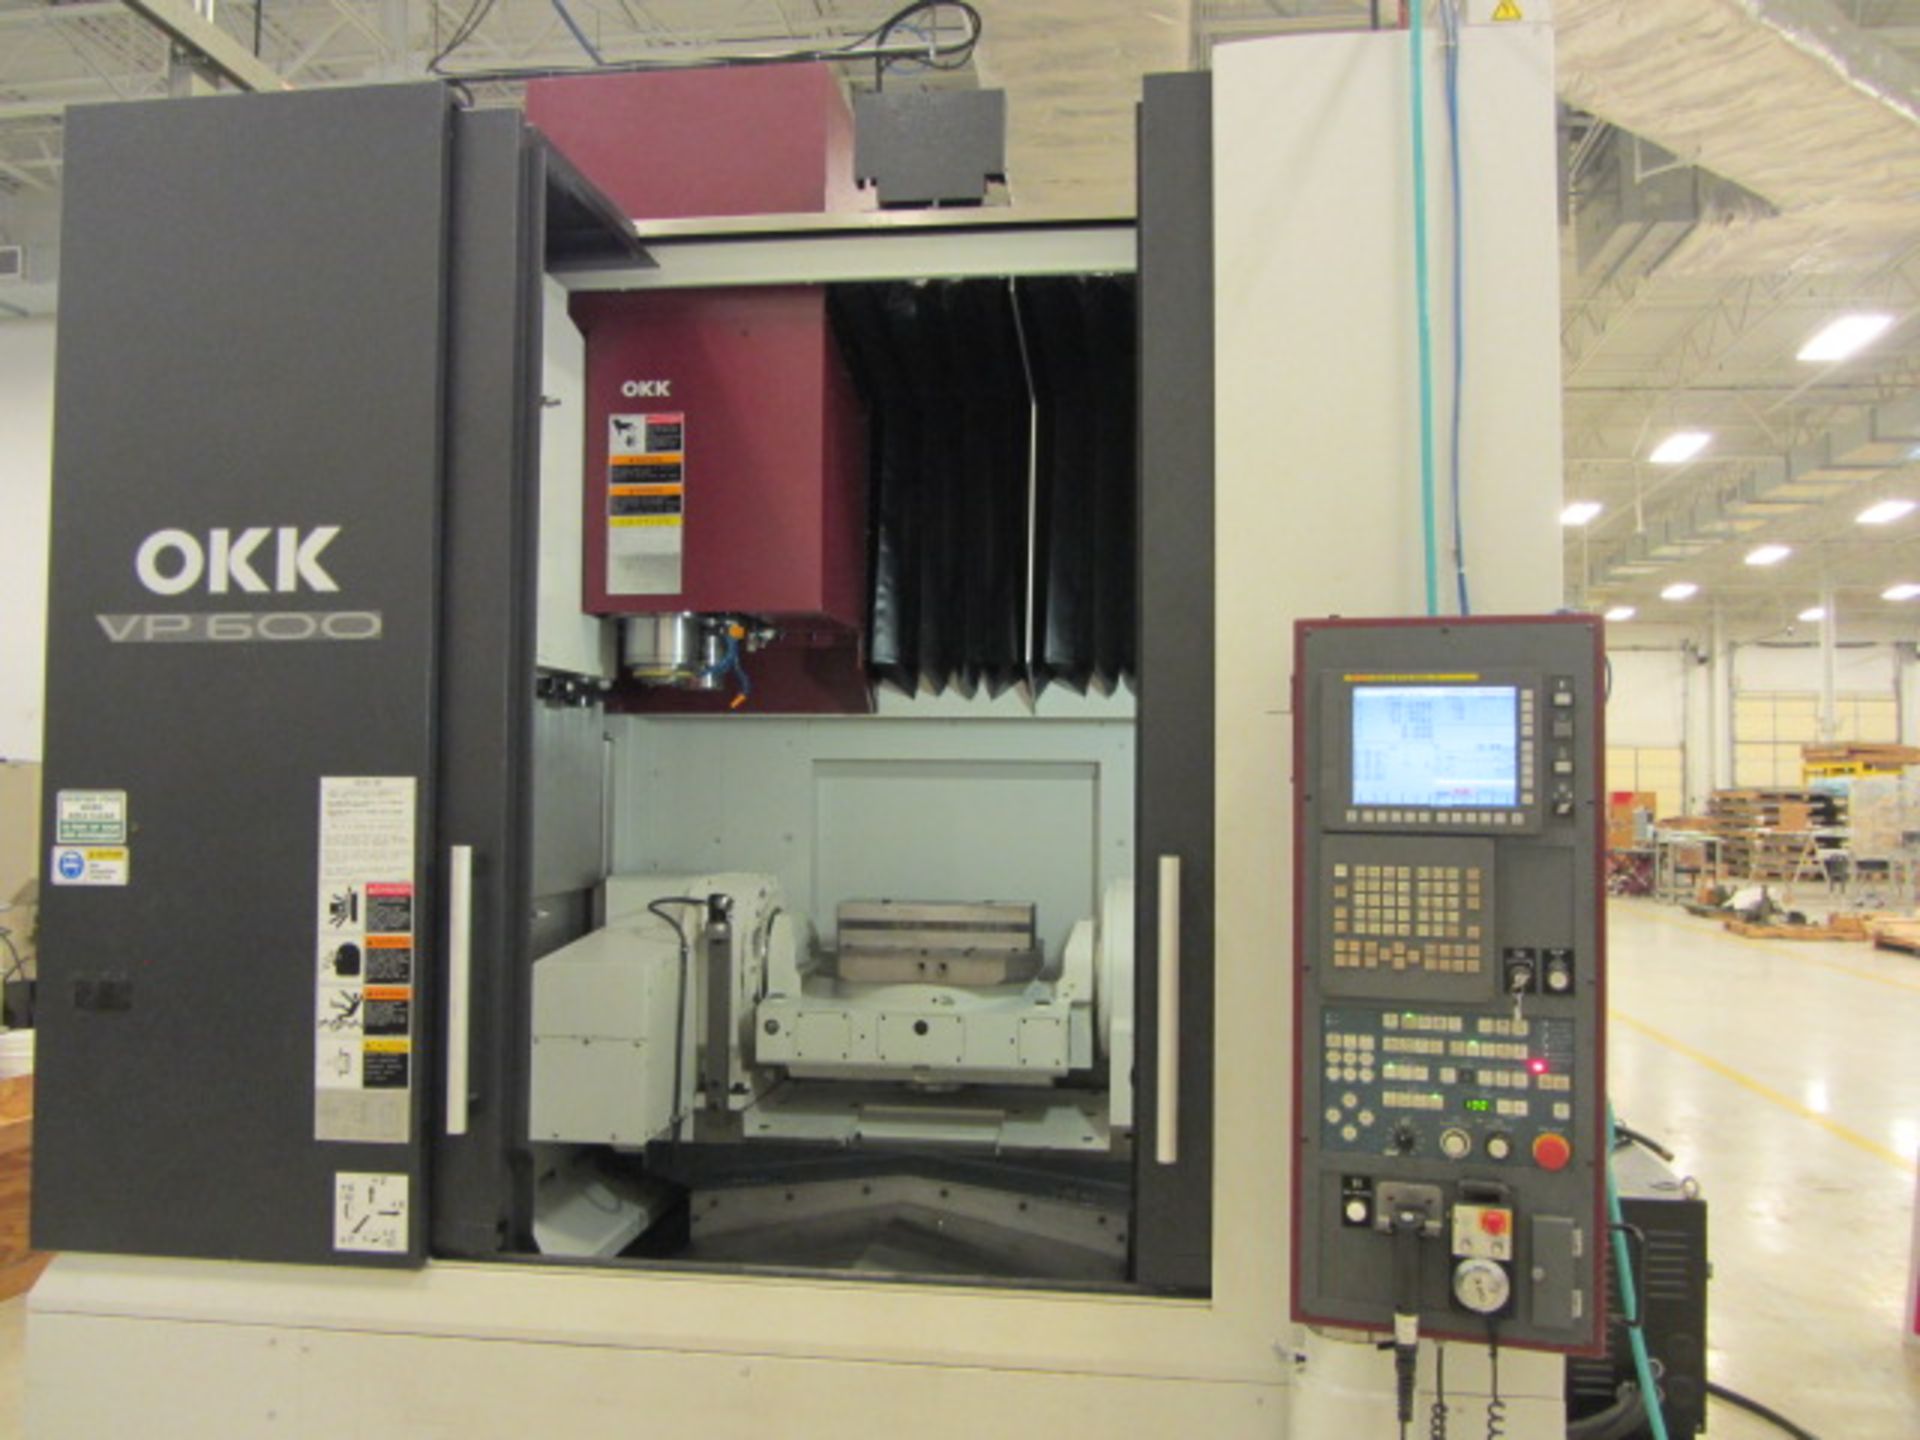 OKK VP-600 5-Axis CNC Vertical Machining Center with 19.7'' Diameter 4/5 Axis Rotary Trunnion Table, - Bild 7 aus 14